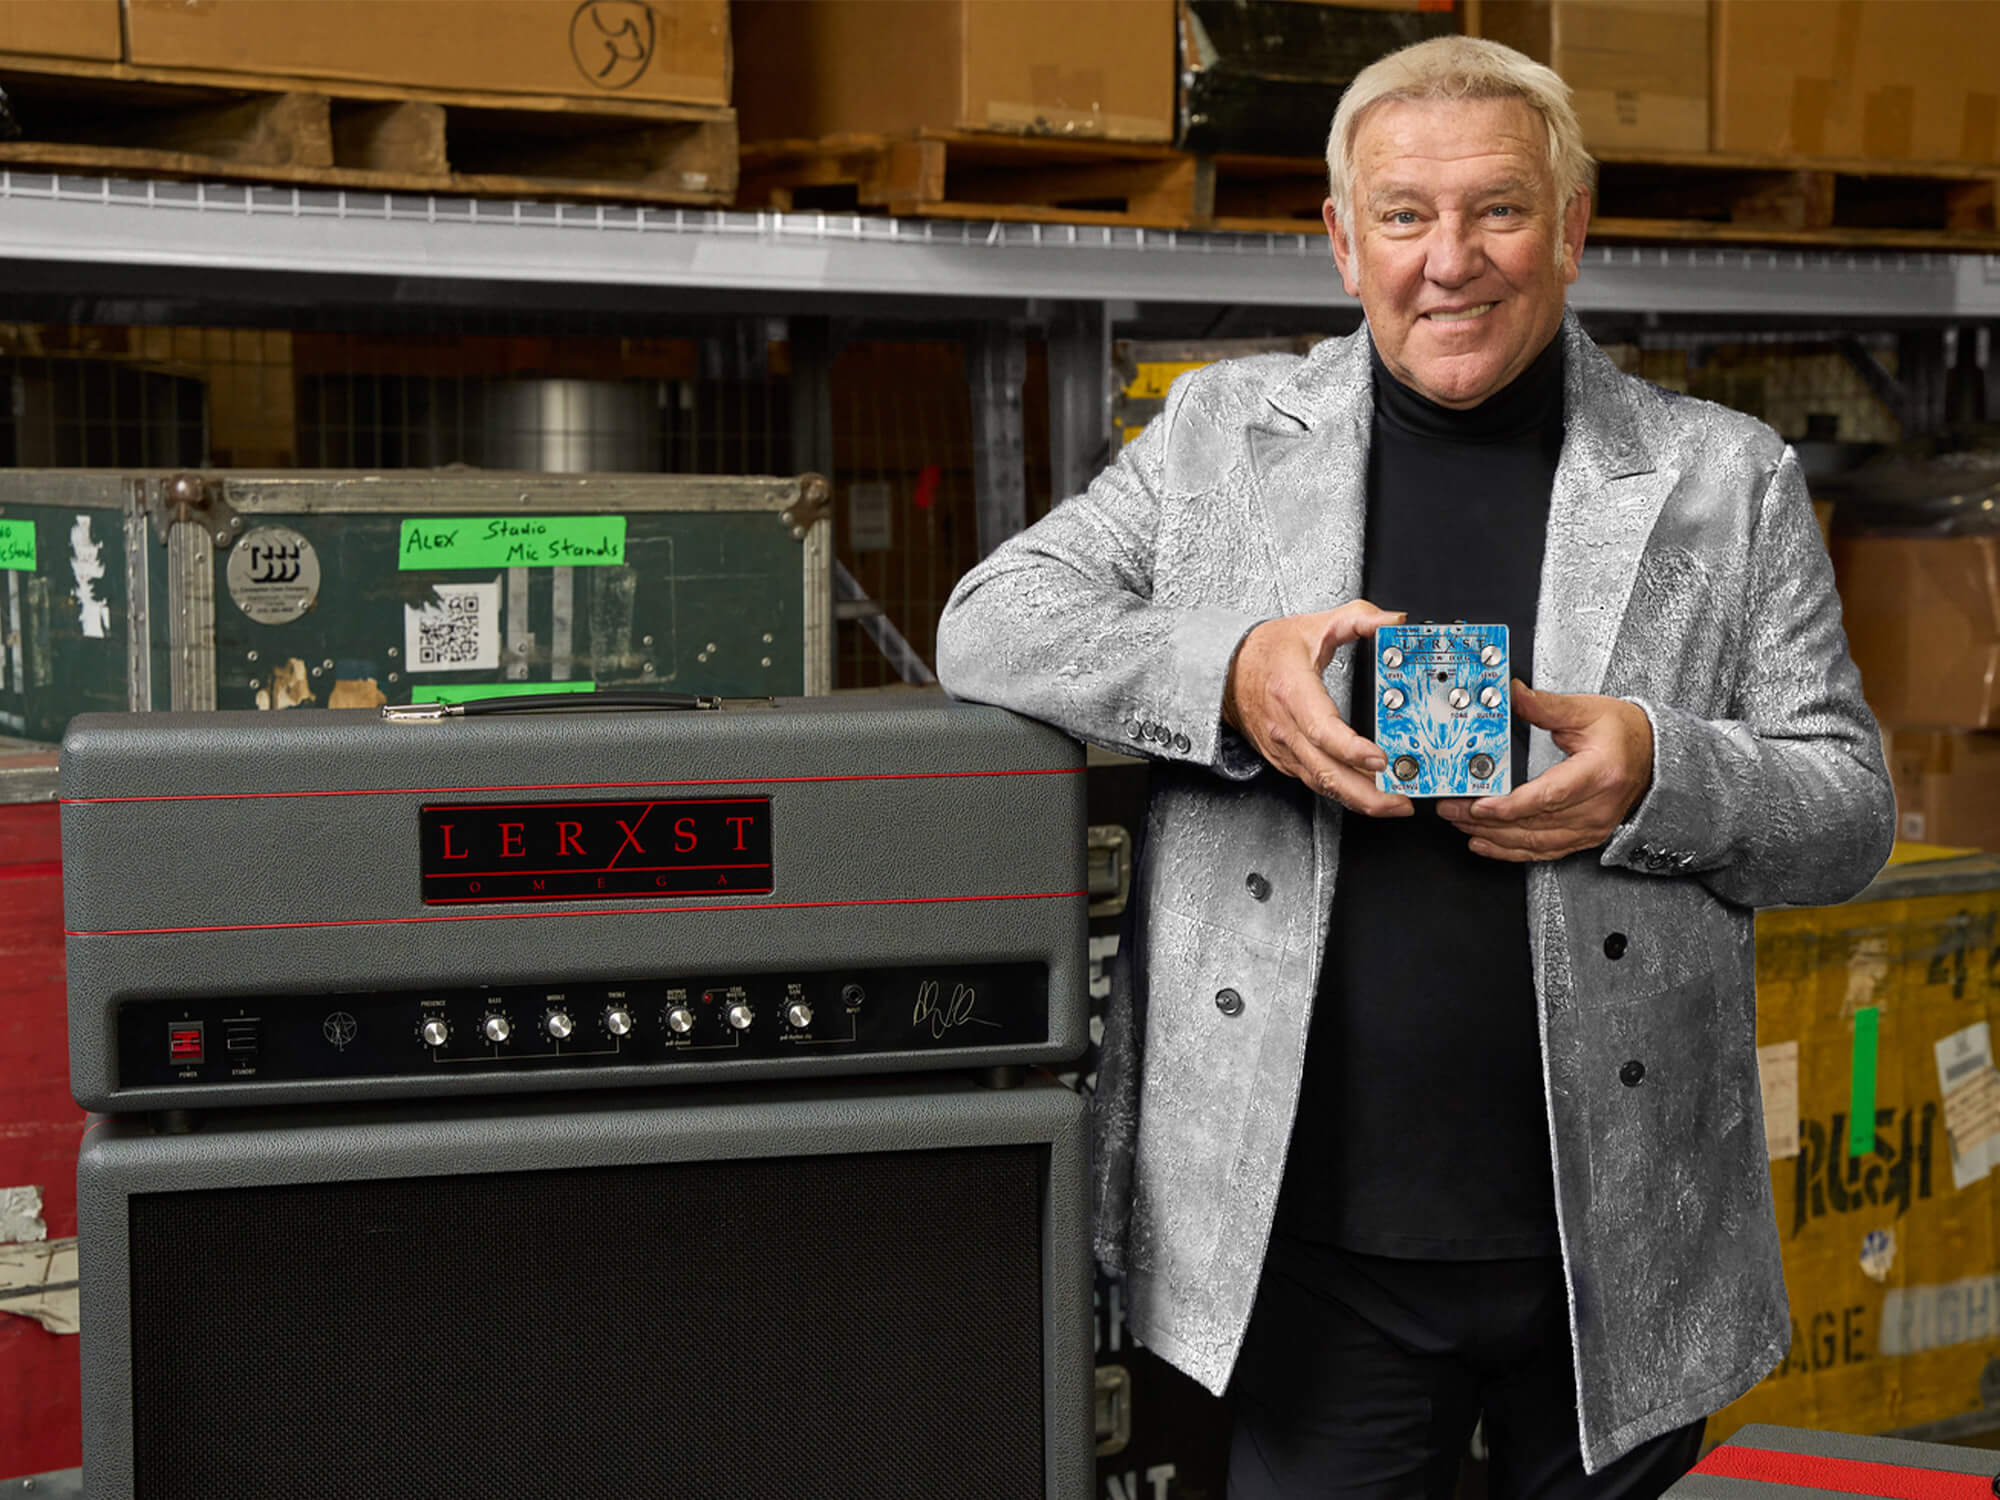 Alex Lifeson holding the Snow Dog pedal. He is smiling and stood next to a Lerxst amp stack.